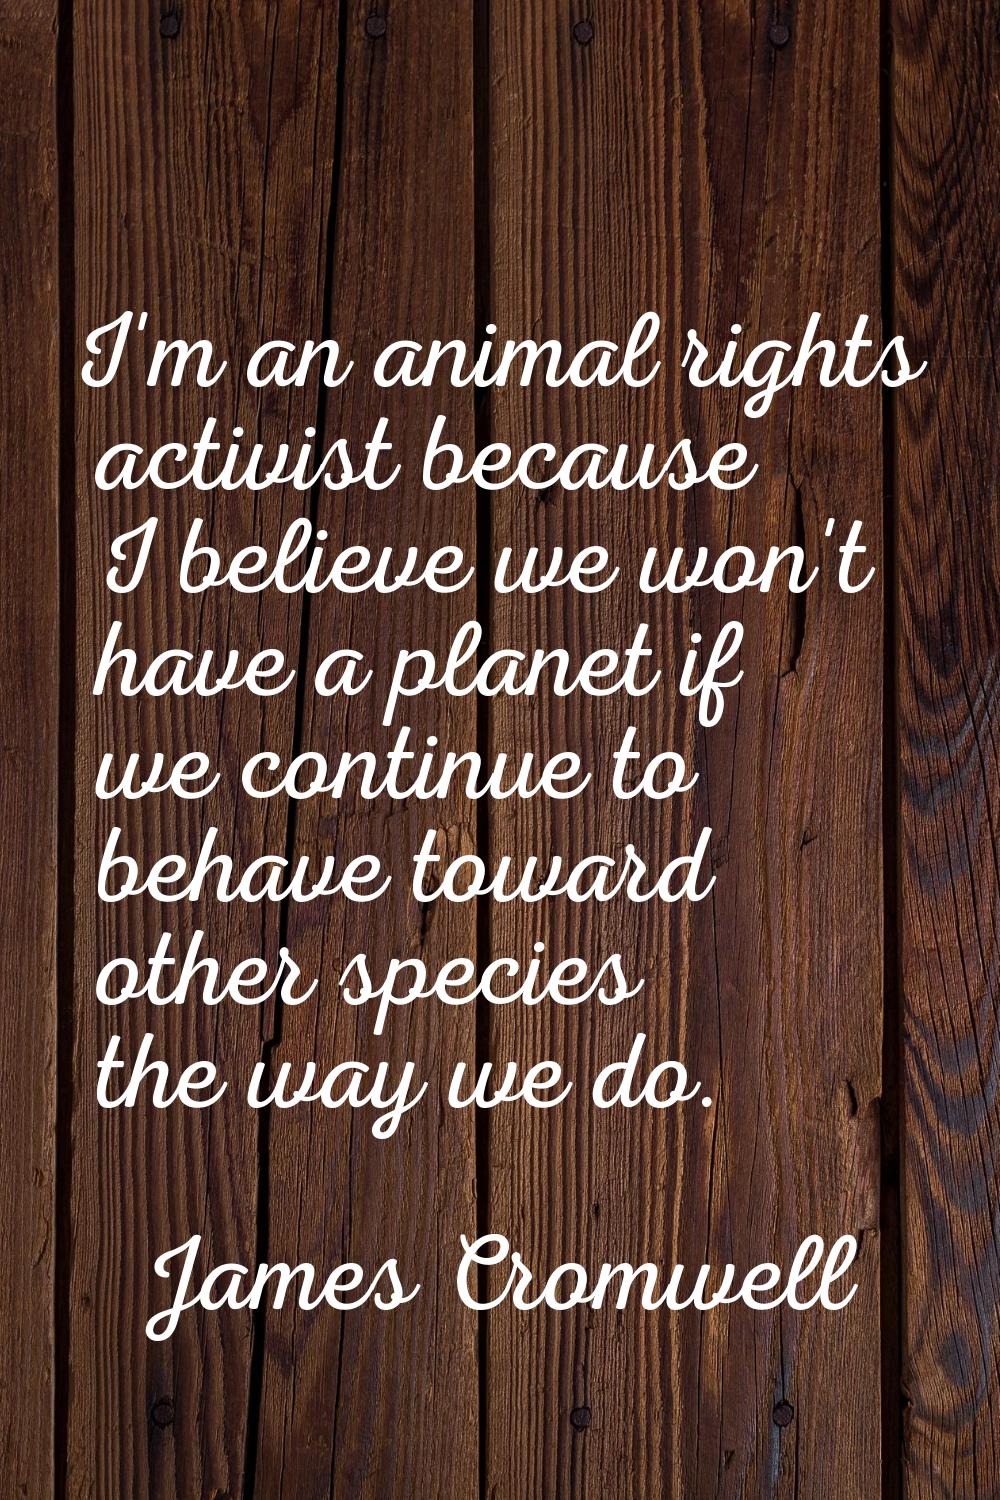 I'm an animal rights activist because I believe we won't have a planet if we continue to behave tow